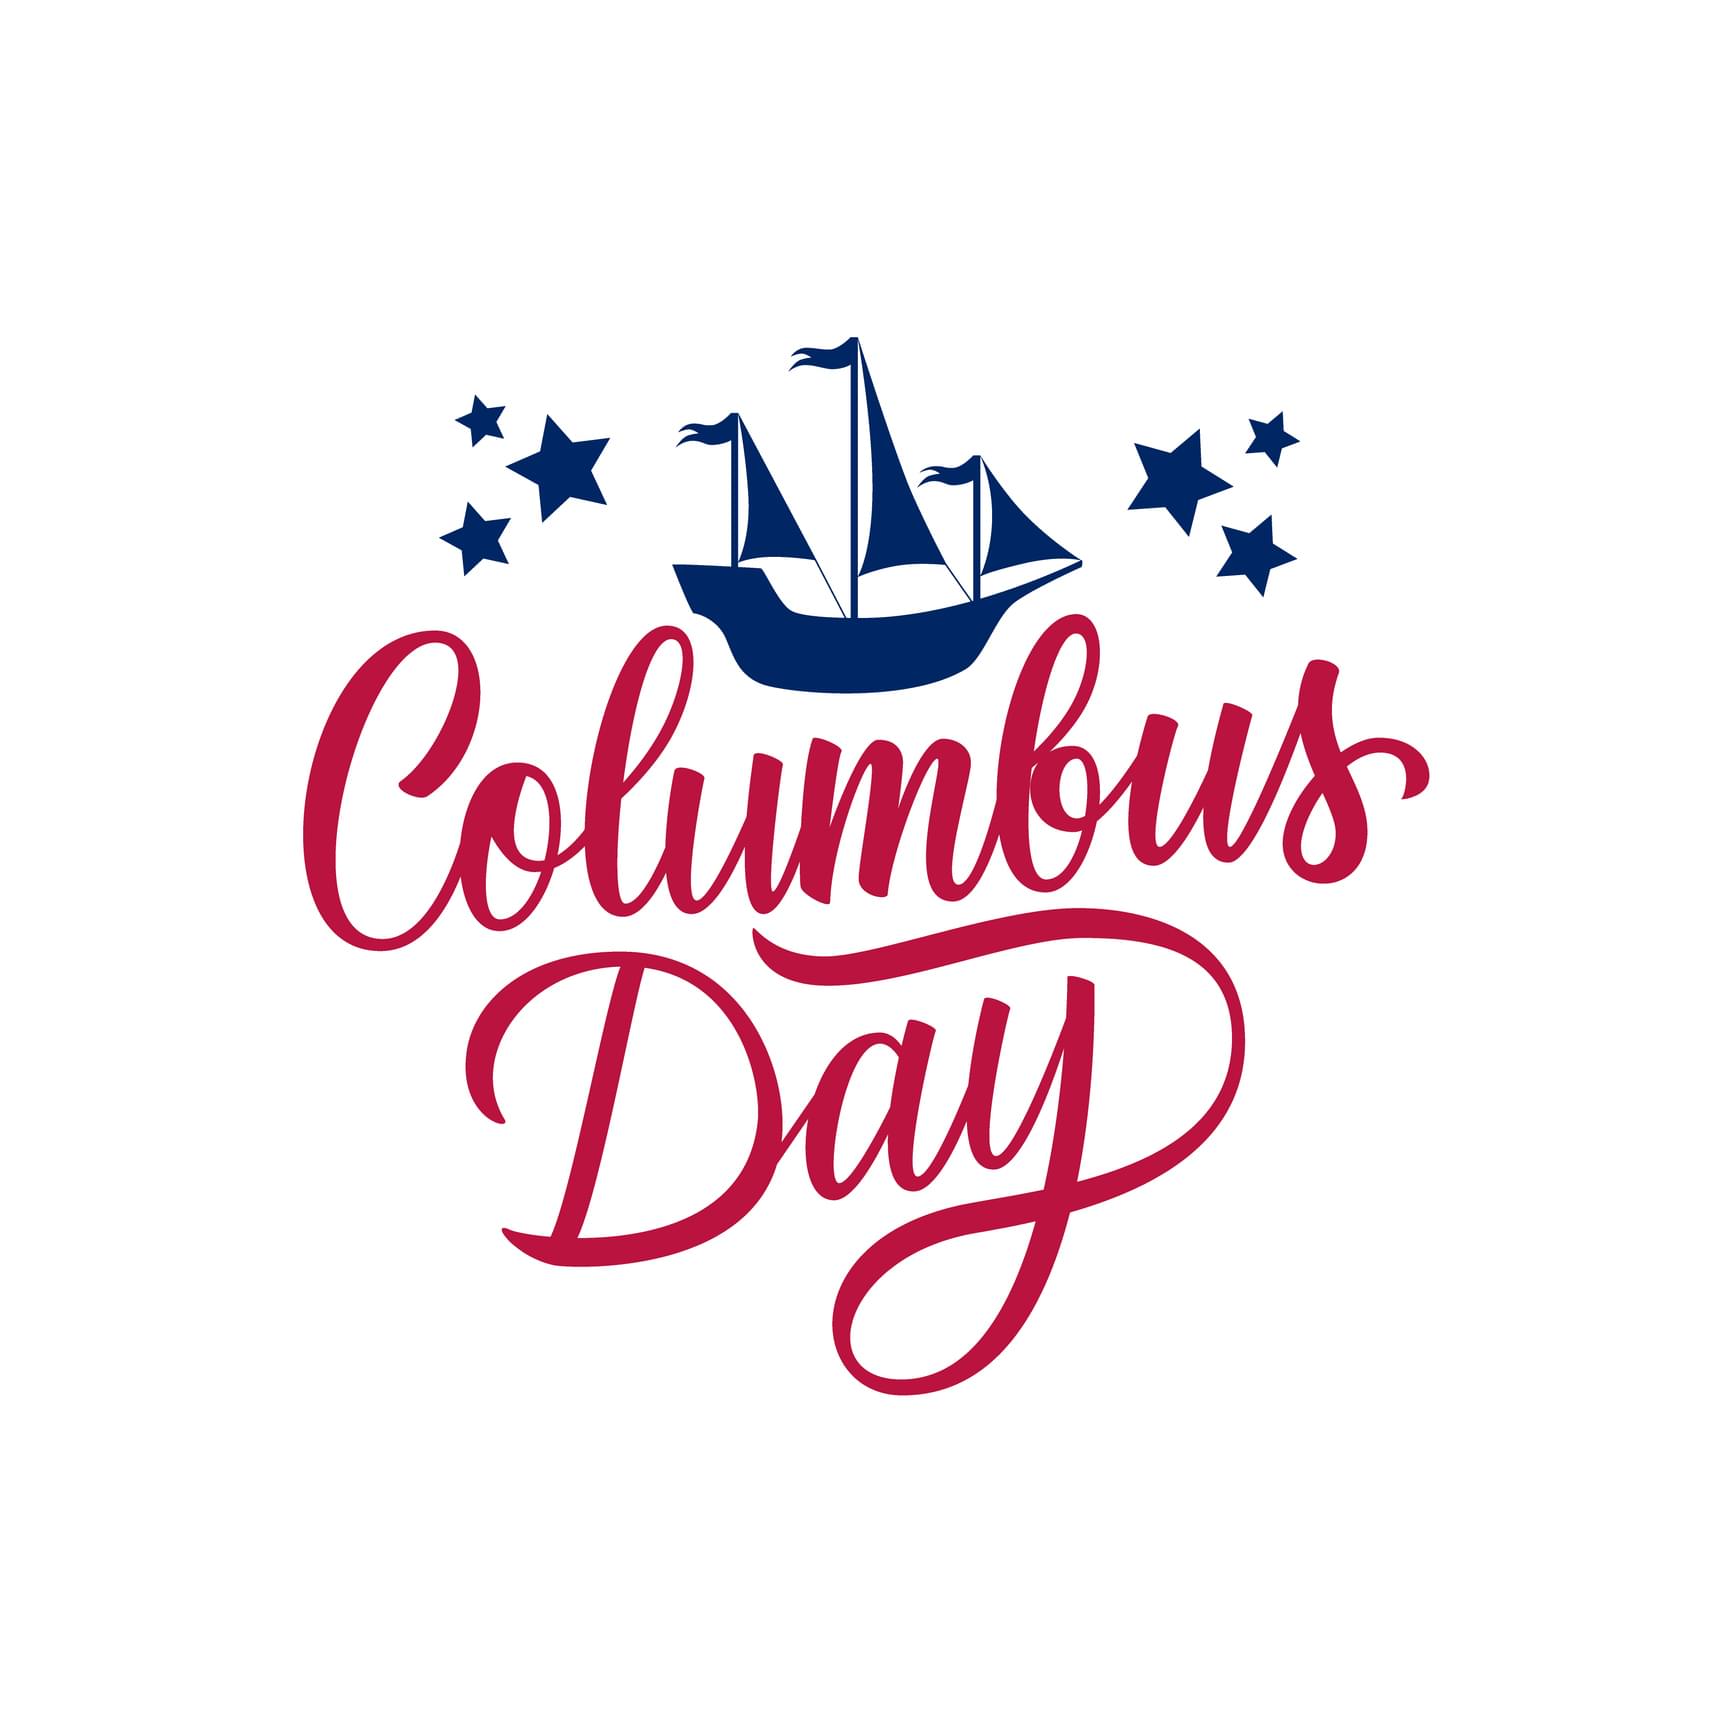 Connecticut Today with Paul Pacelli: Columbus Day, Themis Klarides, and More